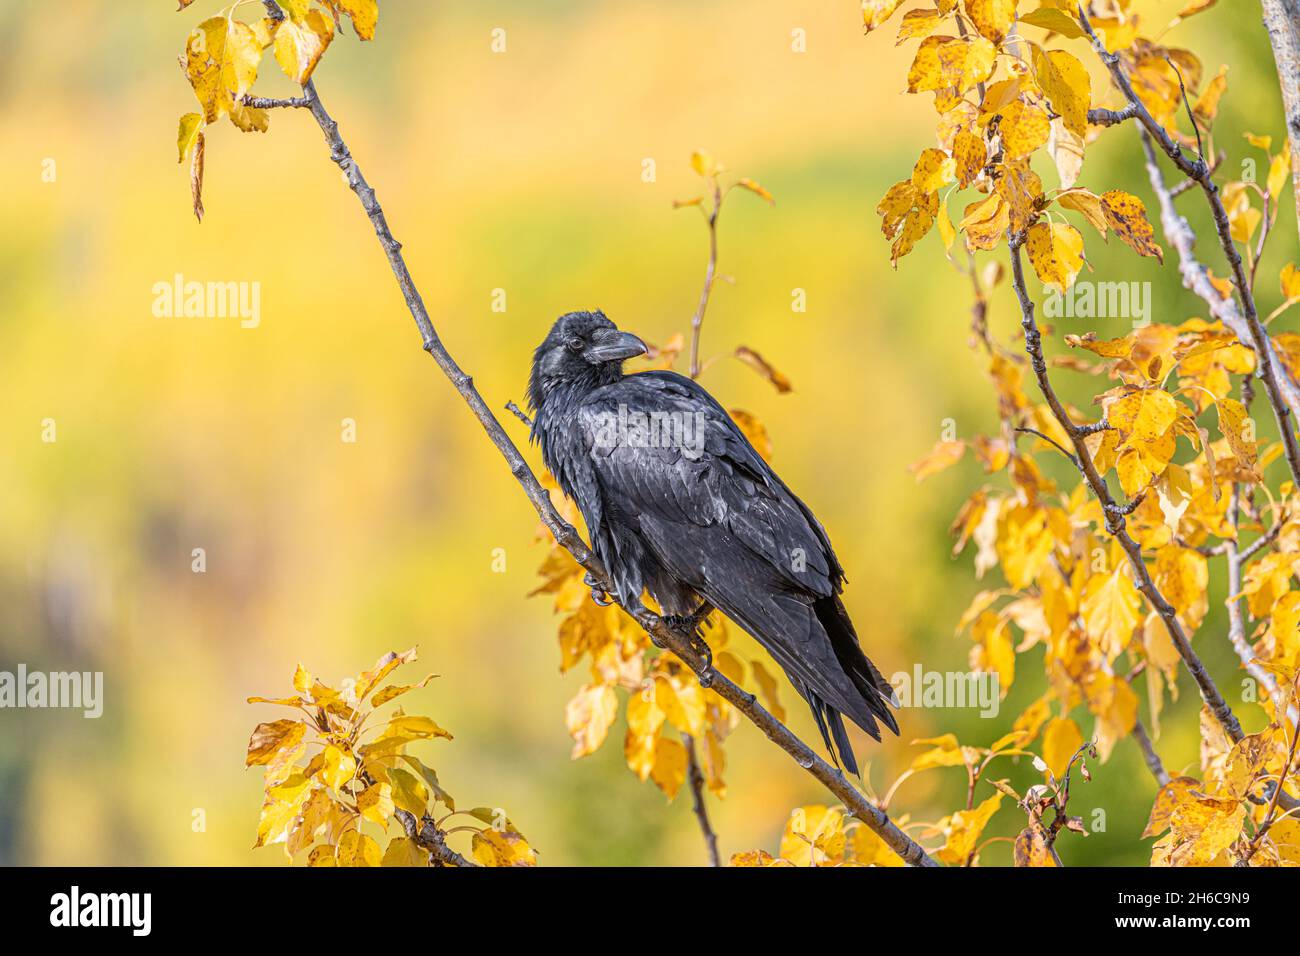 Wild raven seen in fall, autumn in northern Canada. Yellow background with black bird. Stock Photo